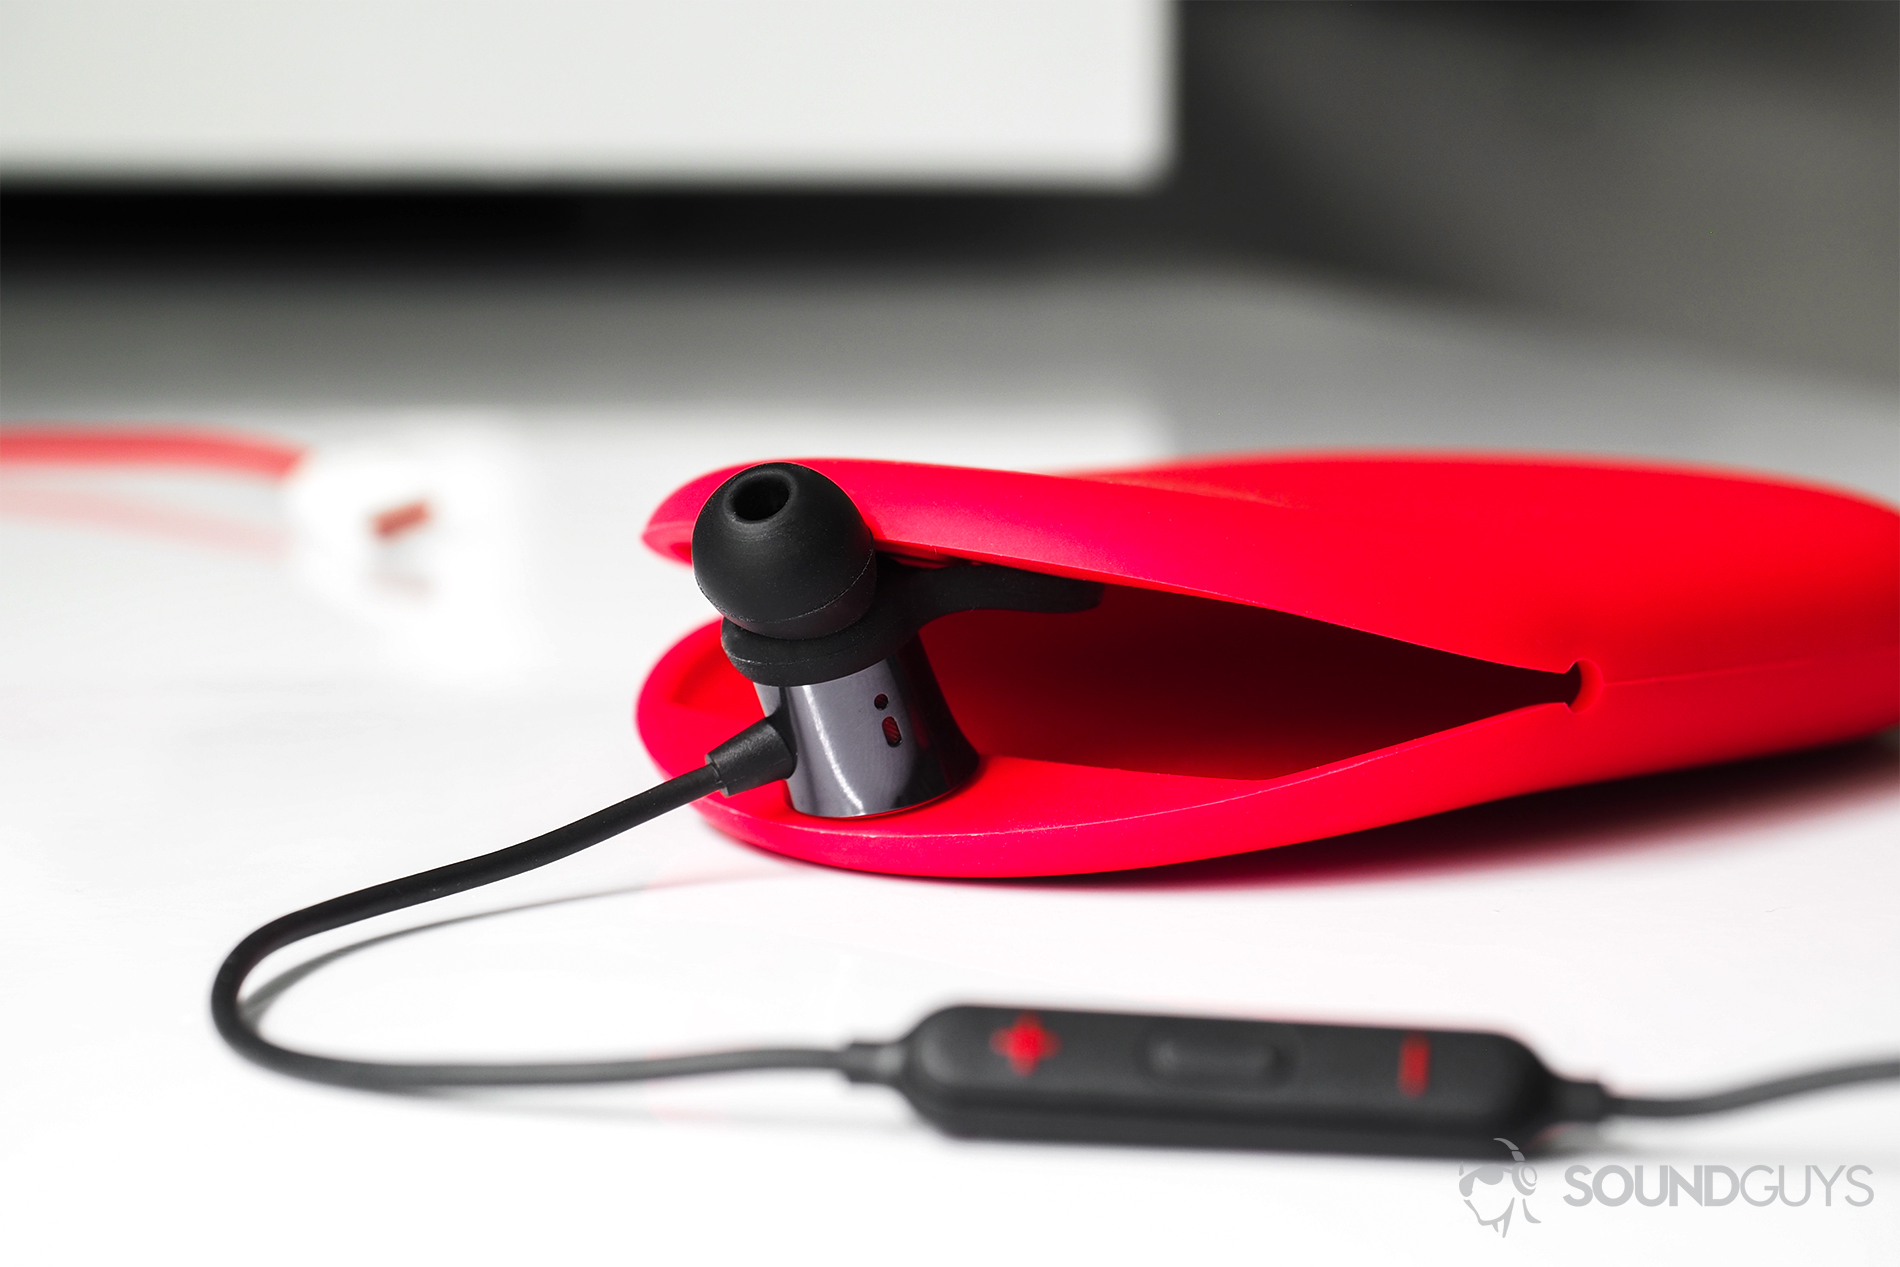 A straight-on image of the OnePlus Bullets Wireless earbuds with one of them holding the opening of the carrying case open.